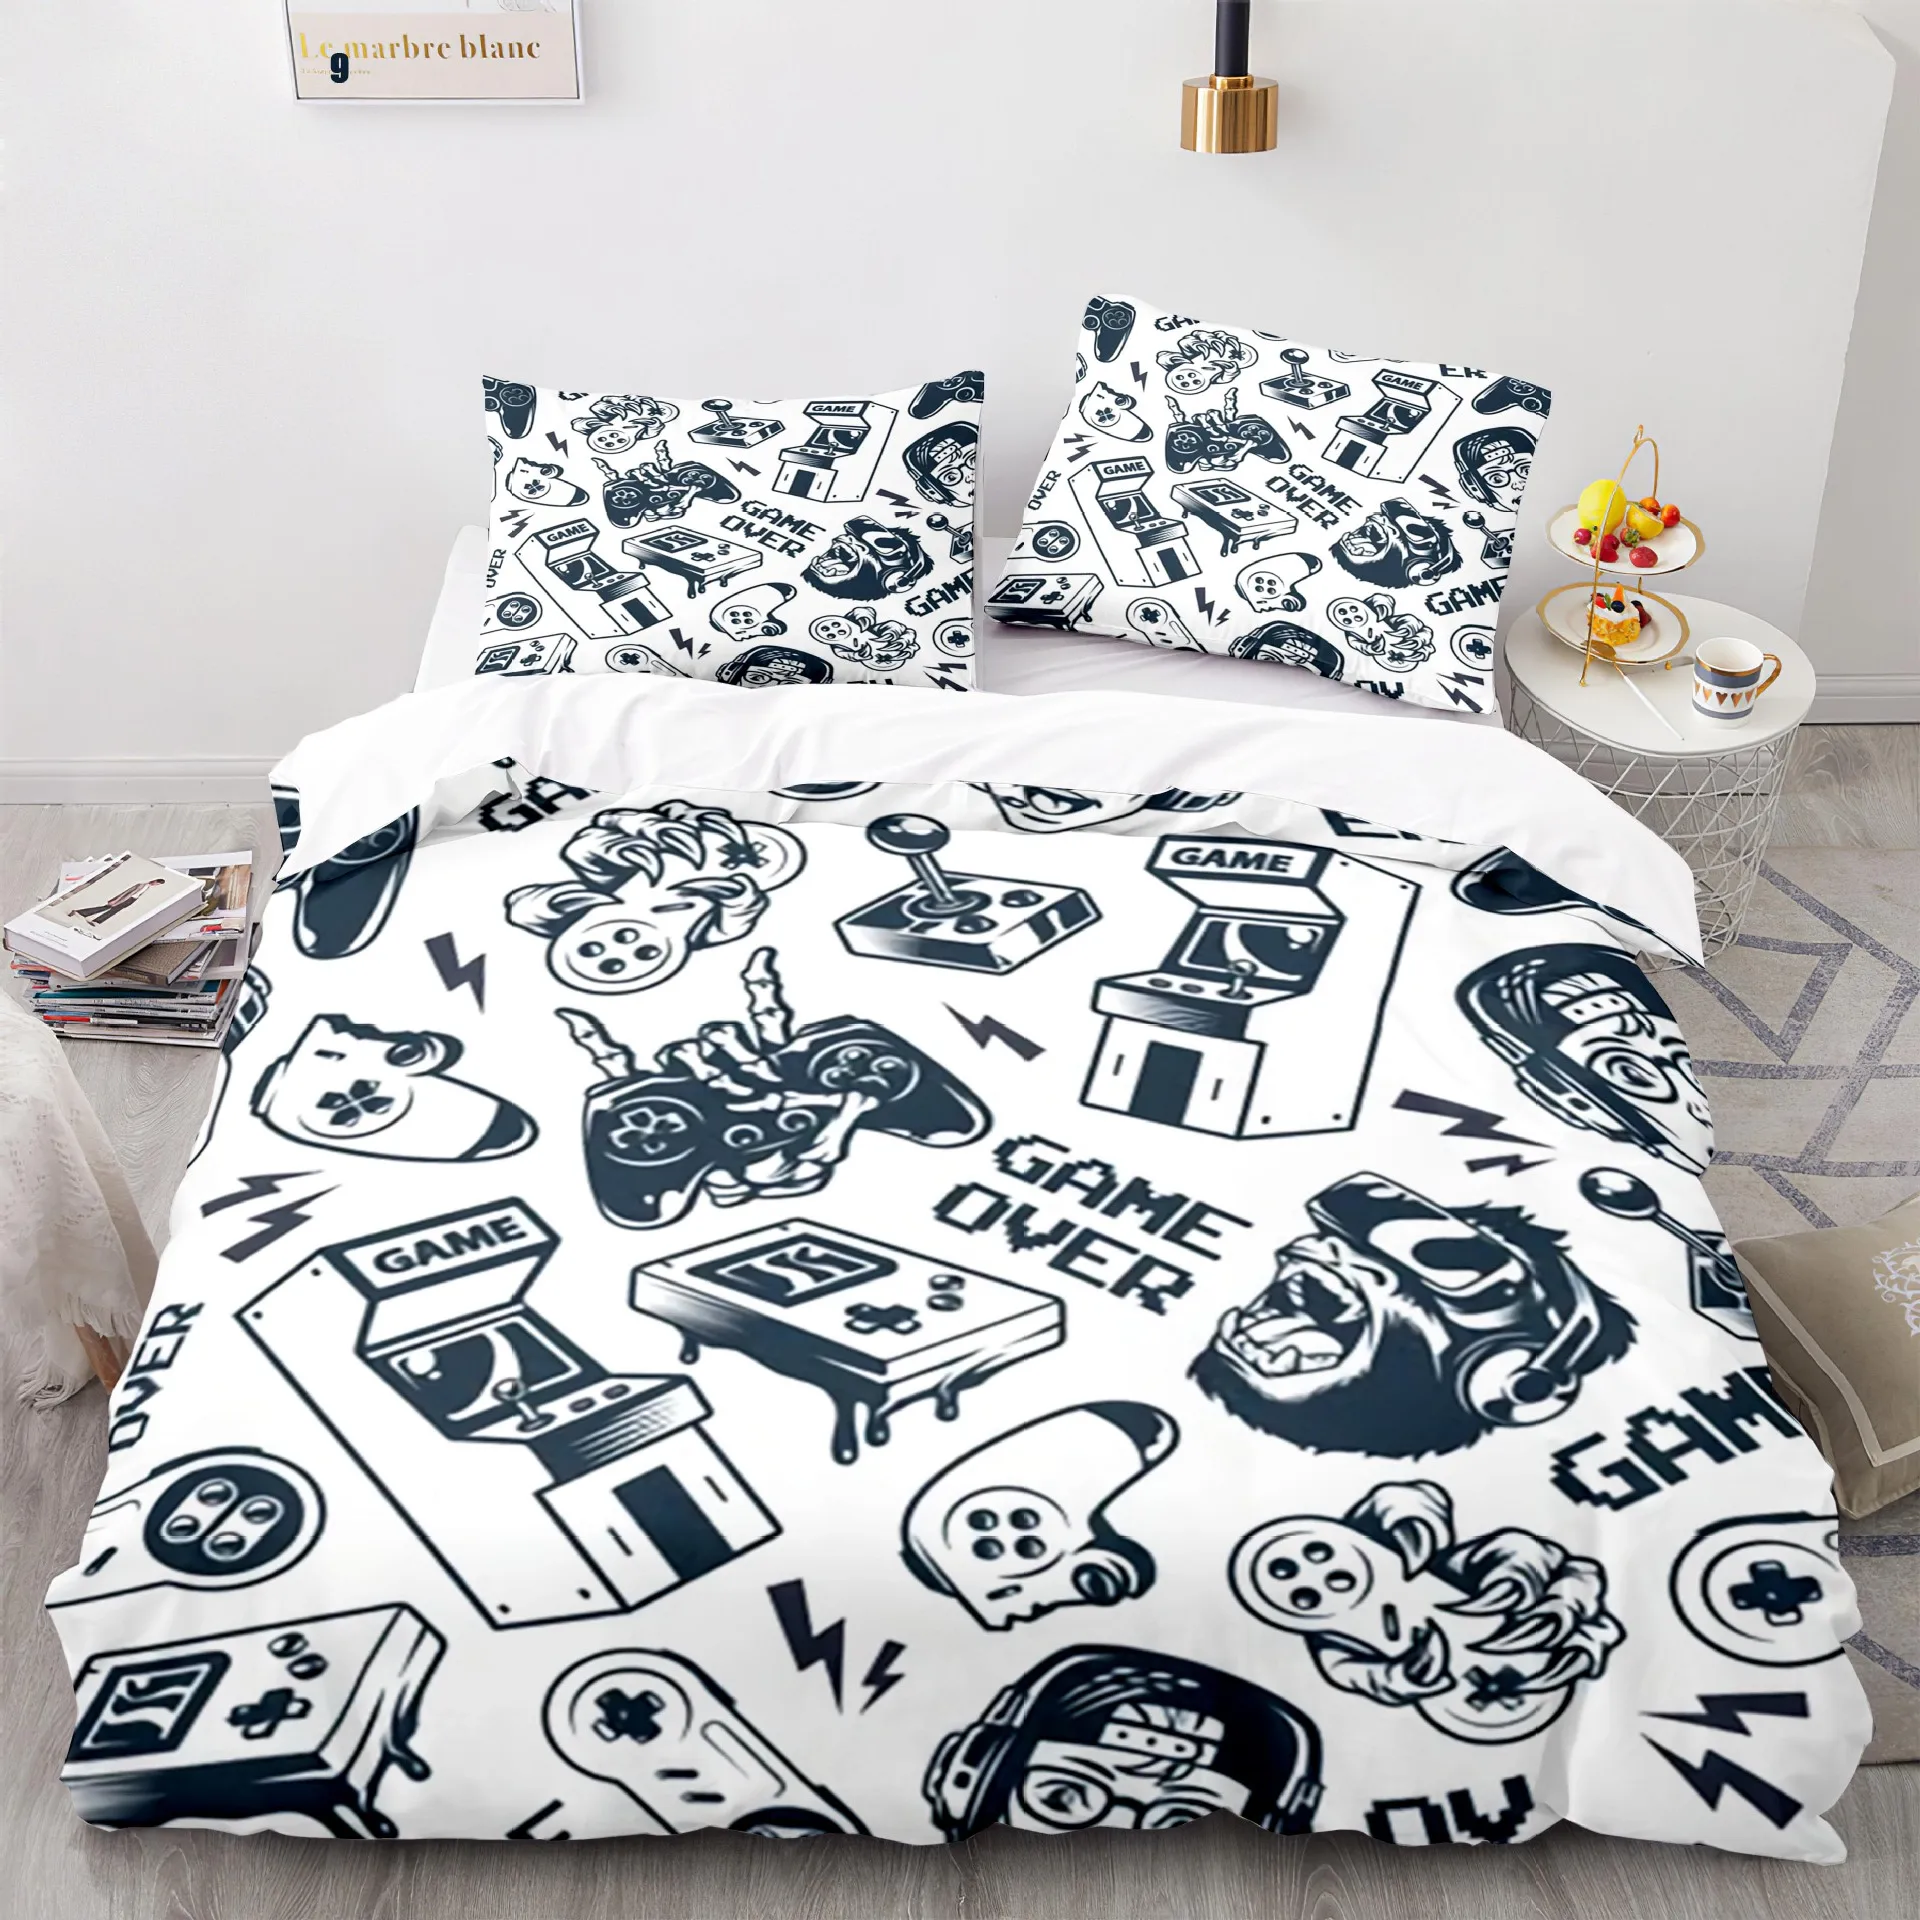 

Video Game Controller Bedding Set Colorful Cover Soft Microfiber Bedclothes with Pillowcases for Teens Kids Boys Gamepad Duvet